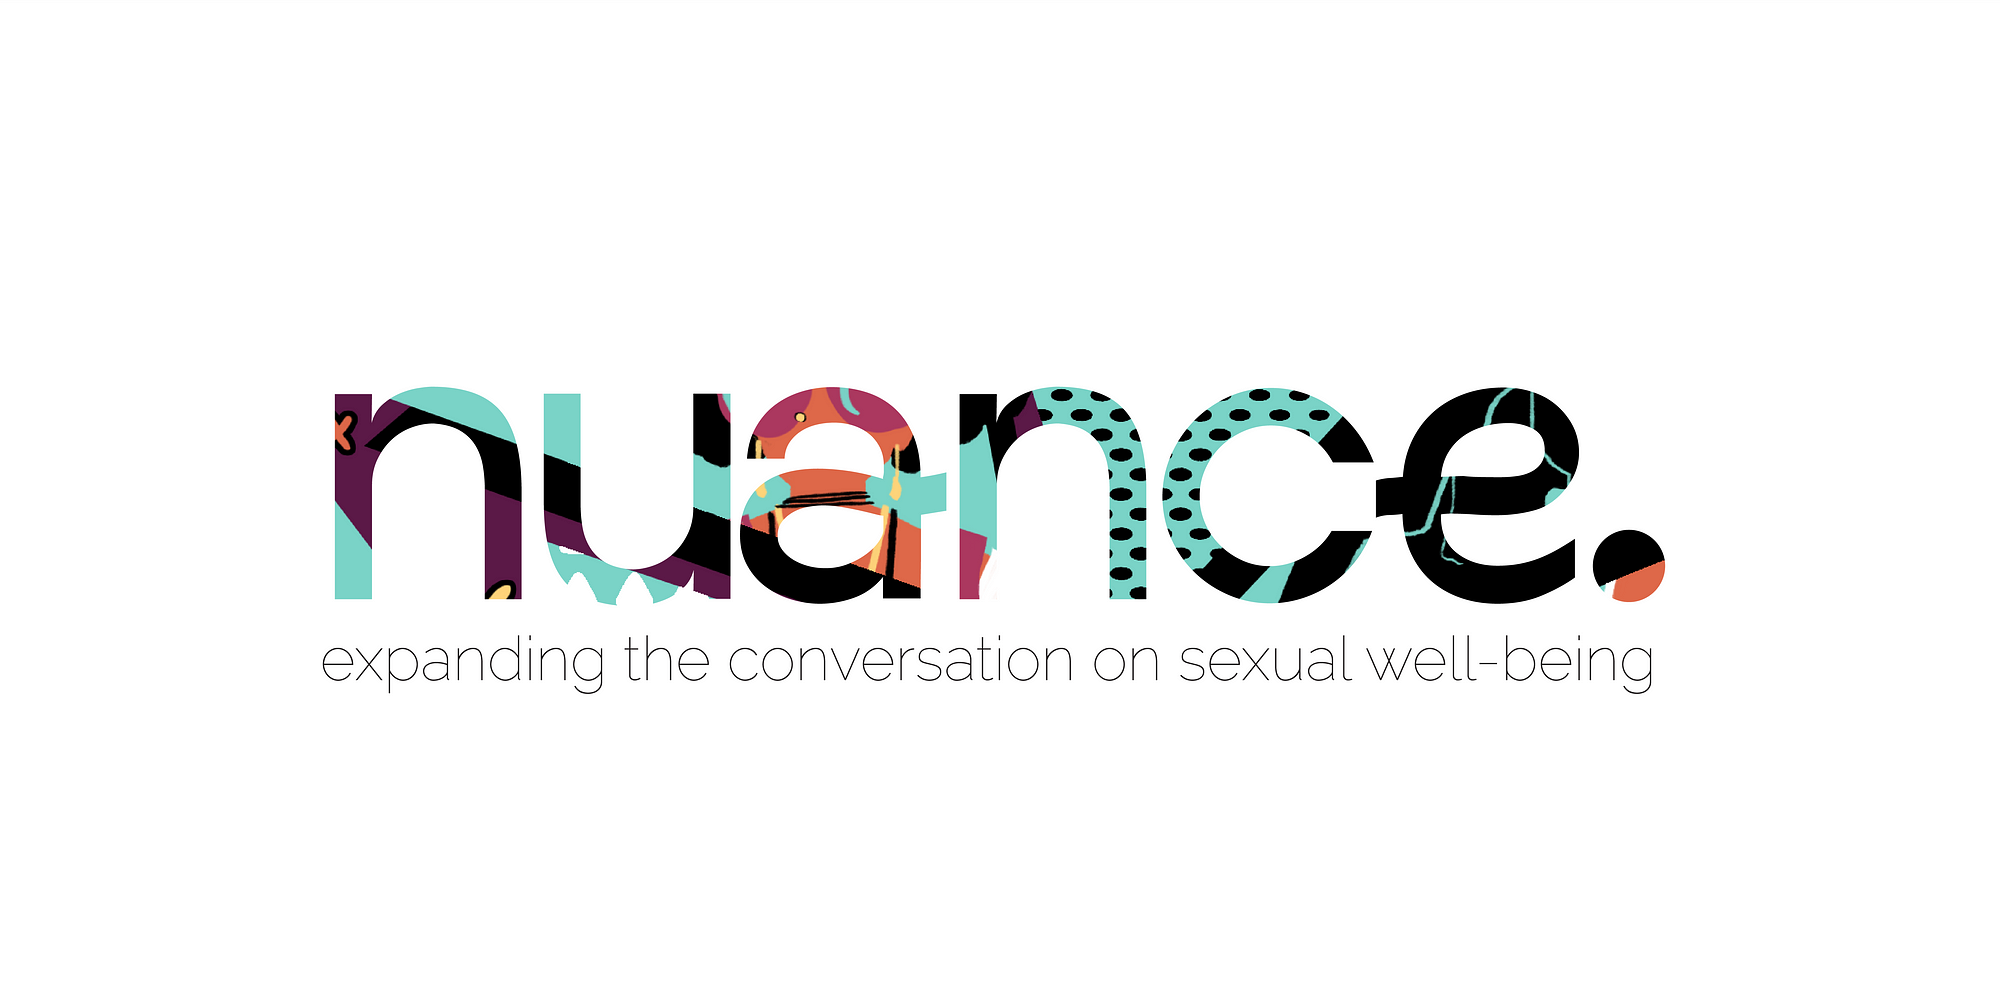 The Design Process and Inspiration Behind Branding a Sexual Well-being Publication by Nuance Media Nuance Medium picture